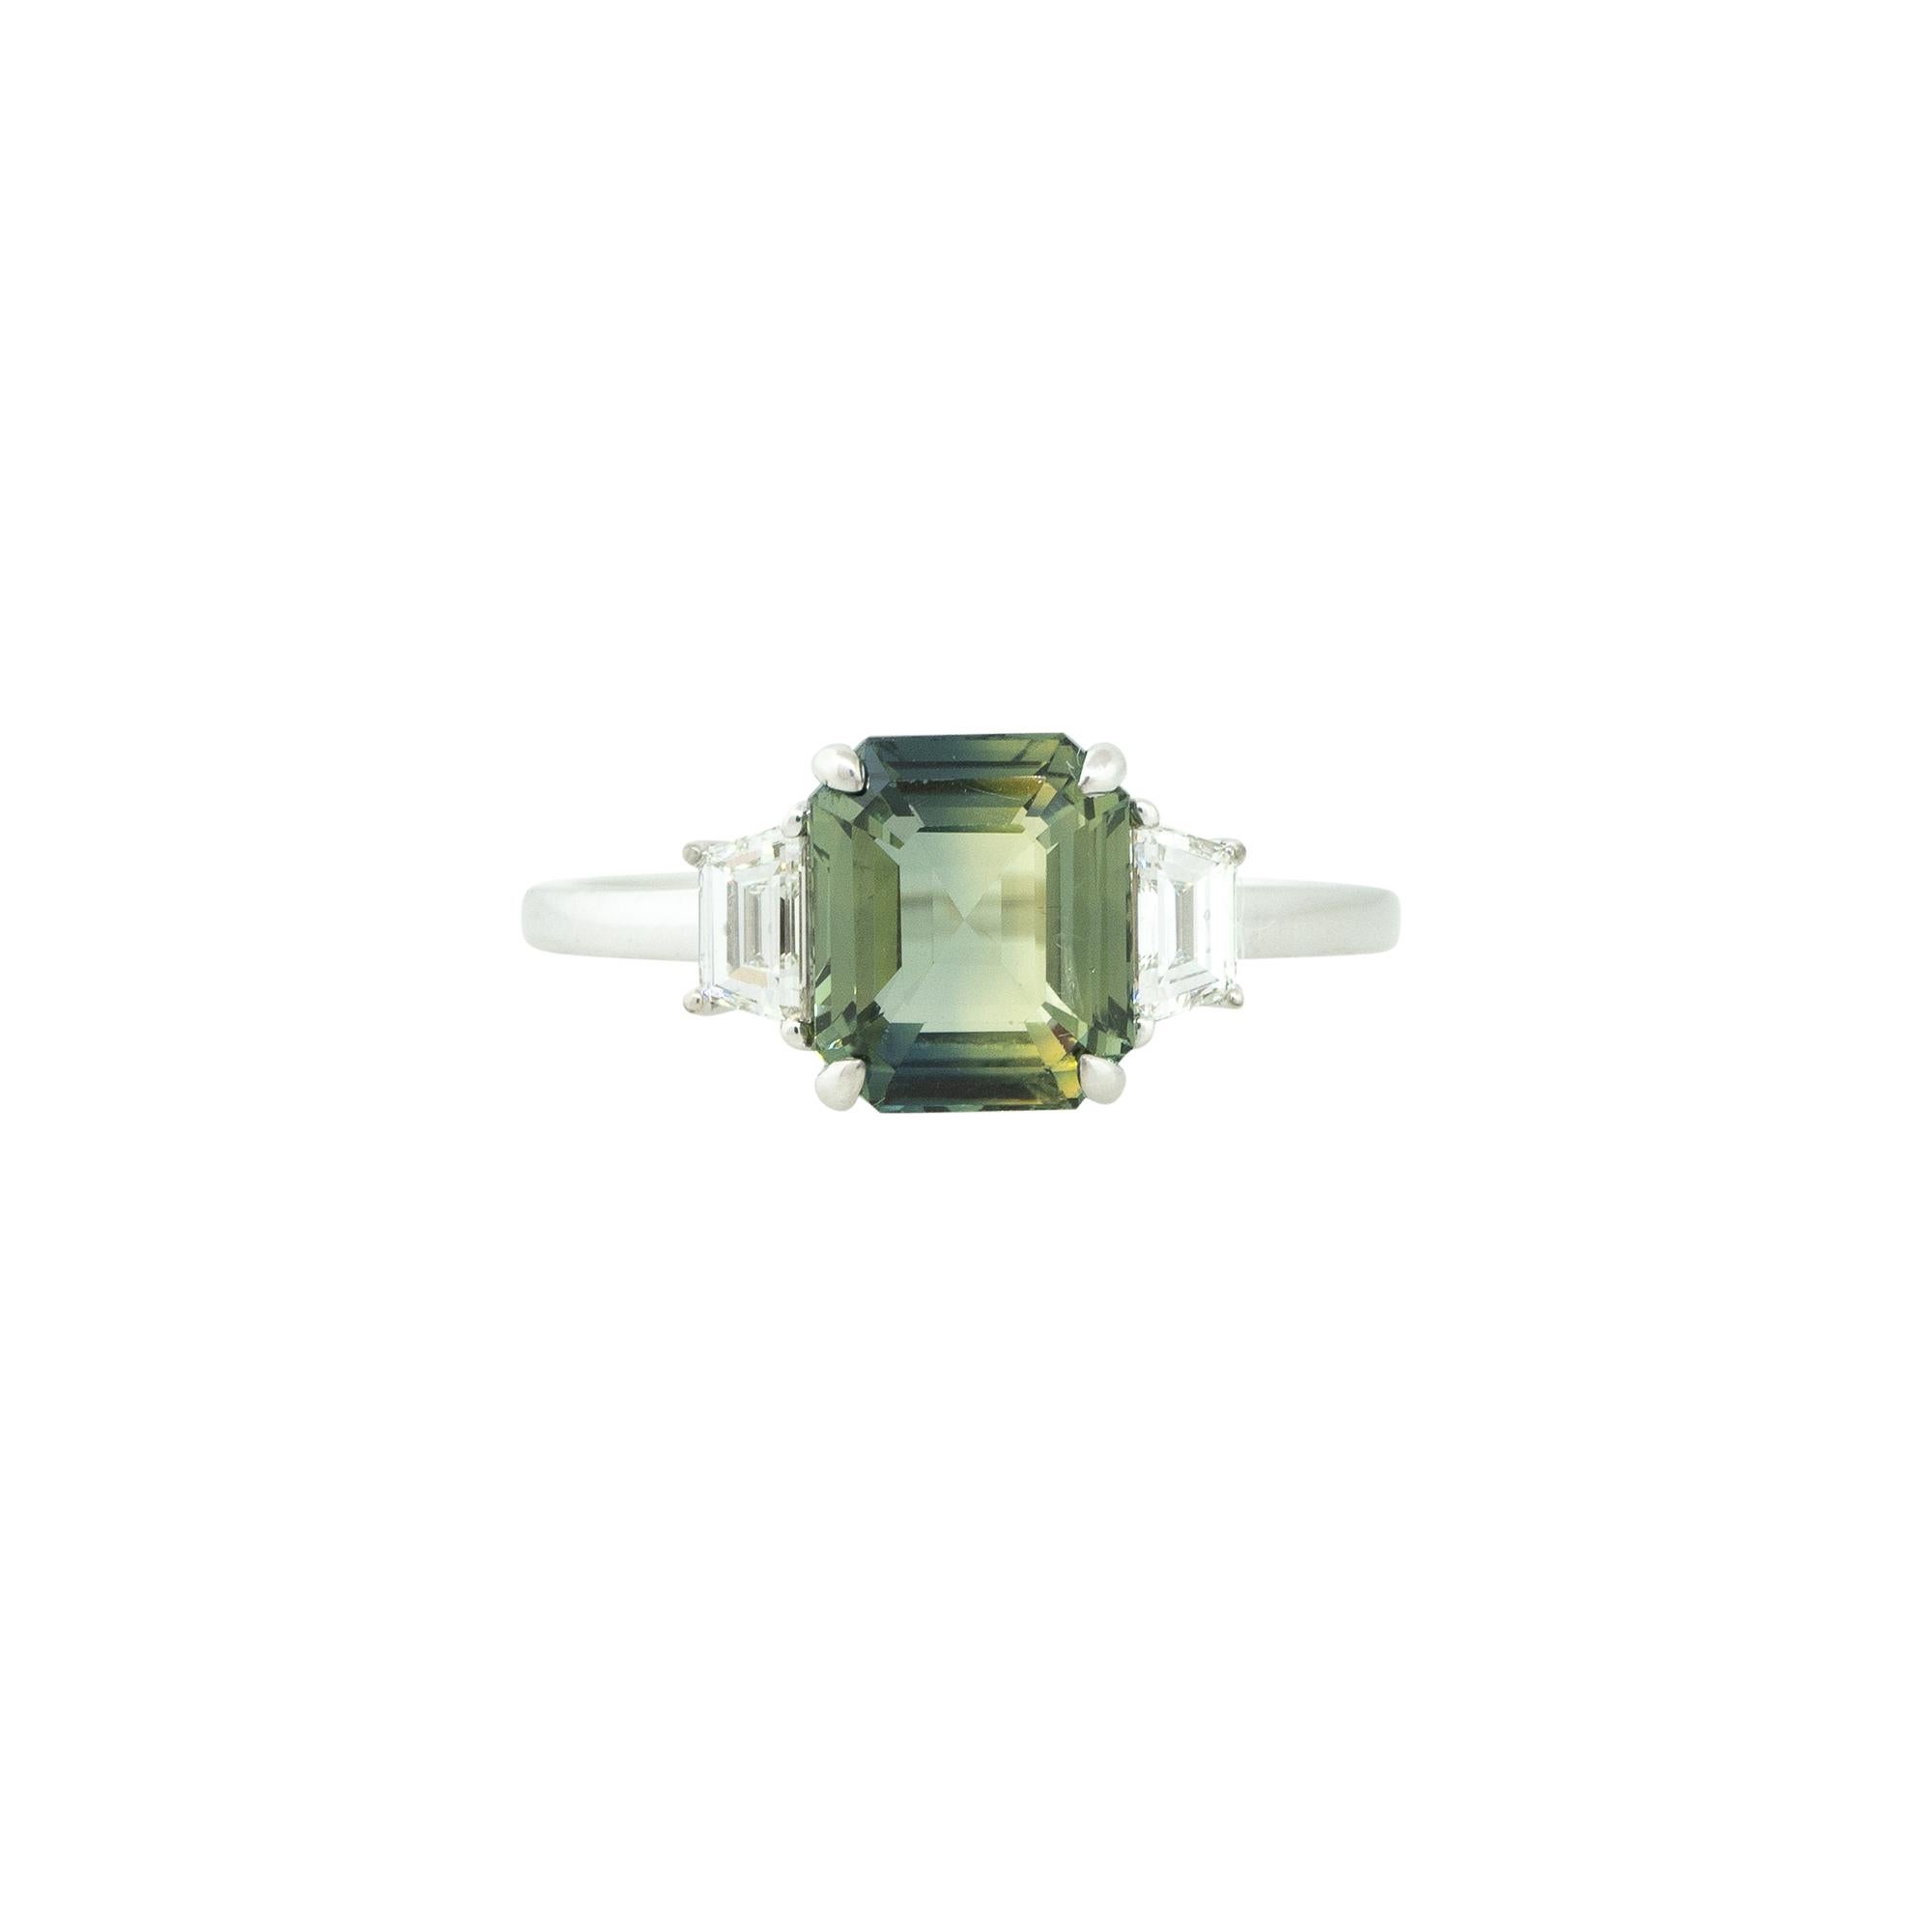 18 Karat White Gold 3.03 Carat Sapphire and Diamond Trapezoid Side Stone Ring
Style: Women's Sapphire and Diamond Ring
Material: 18 Karat White Gold
Main Gemstone Details: The Sapphire is approximately a 3.03 Carat Octagonal Step Cut Sapphire. The